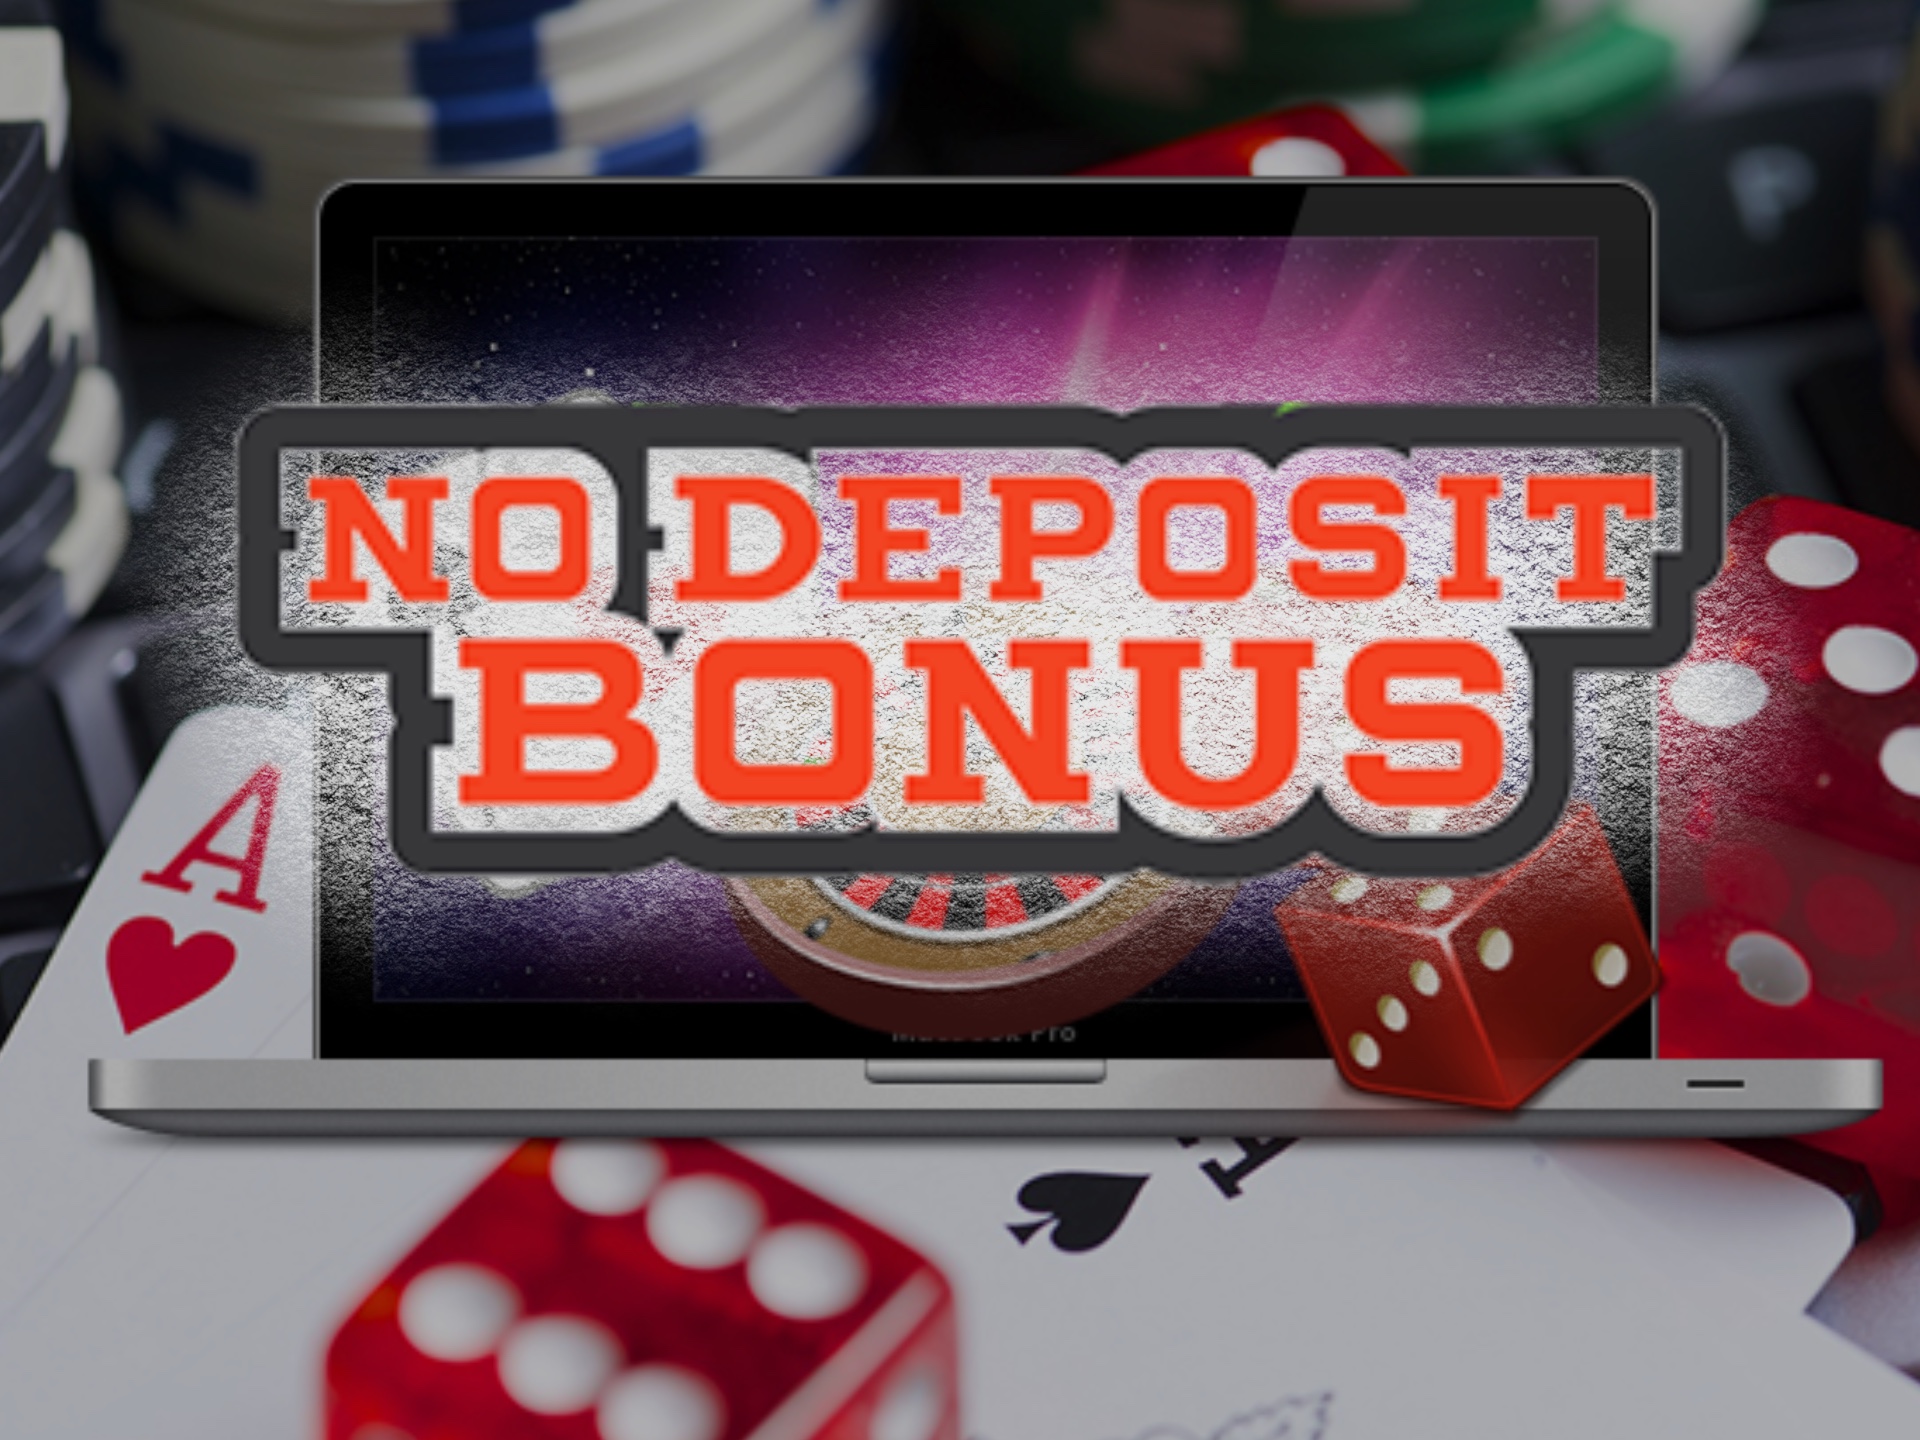 You should just sign up for an online casino and meet some requirements to get this kind of bonus.